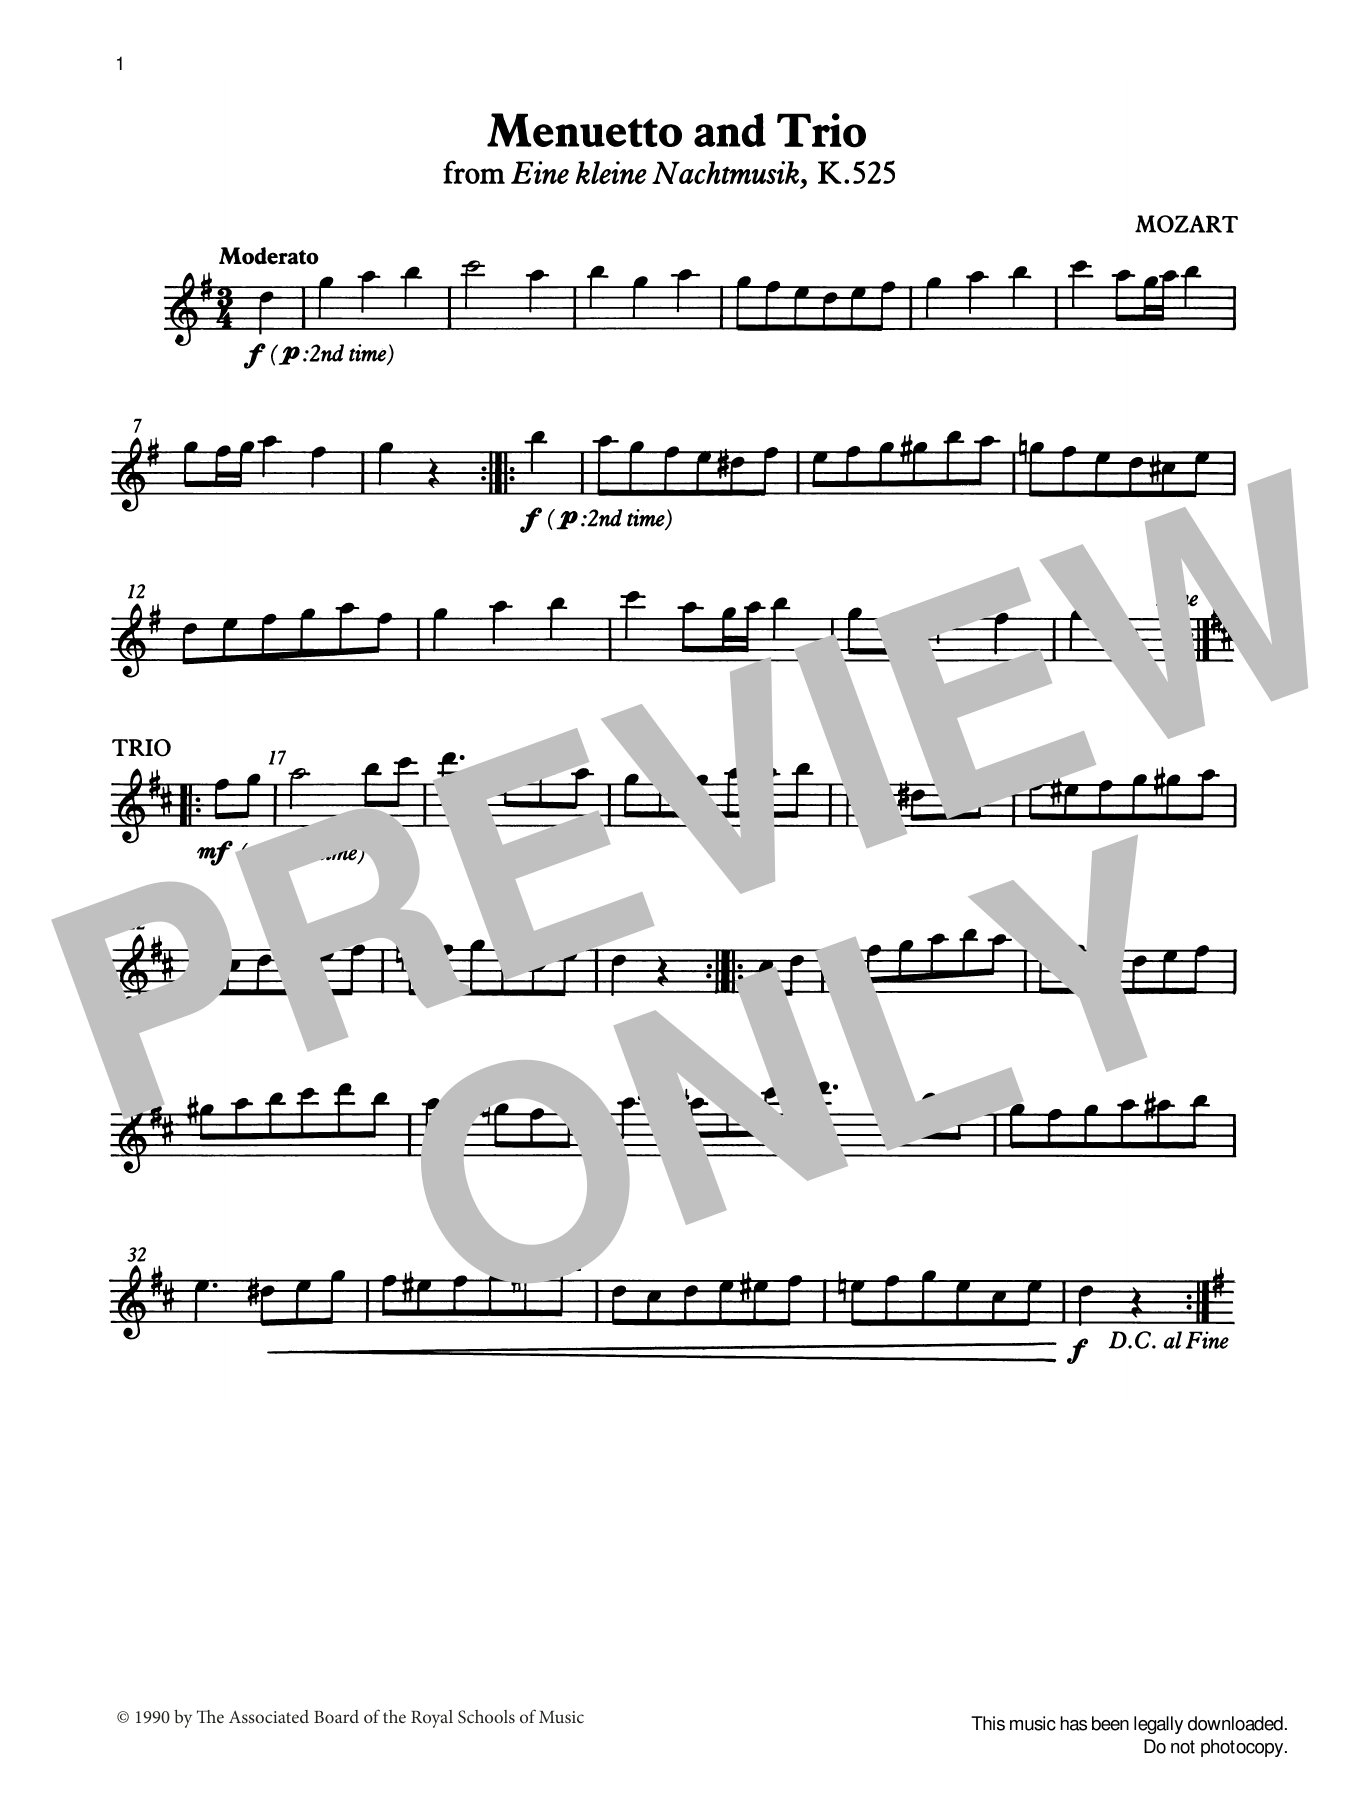 Download W. A. Mozart Menuetto and Trio (score & part) from G Sheet Music